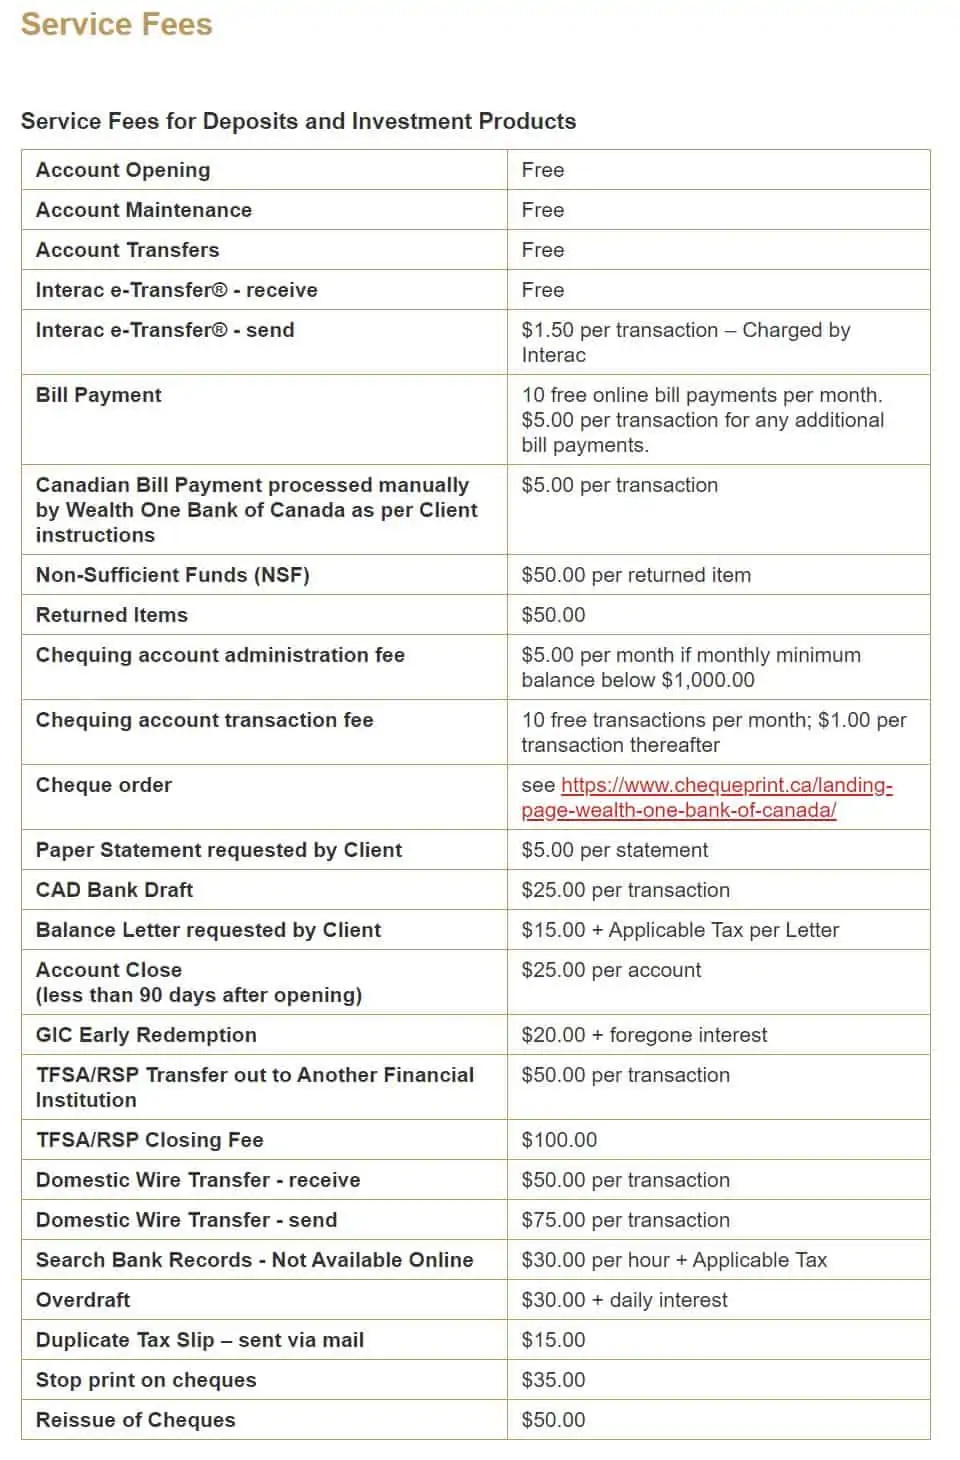 Wealth One Bank of Canada fees